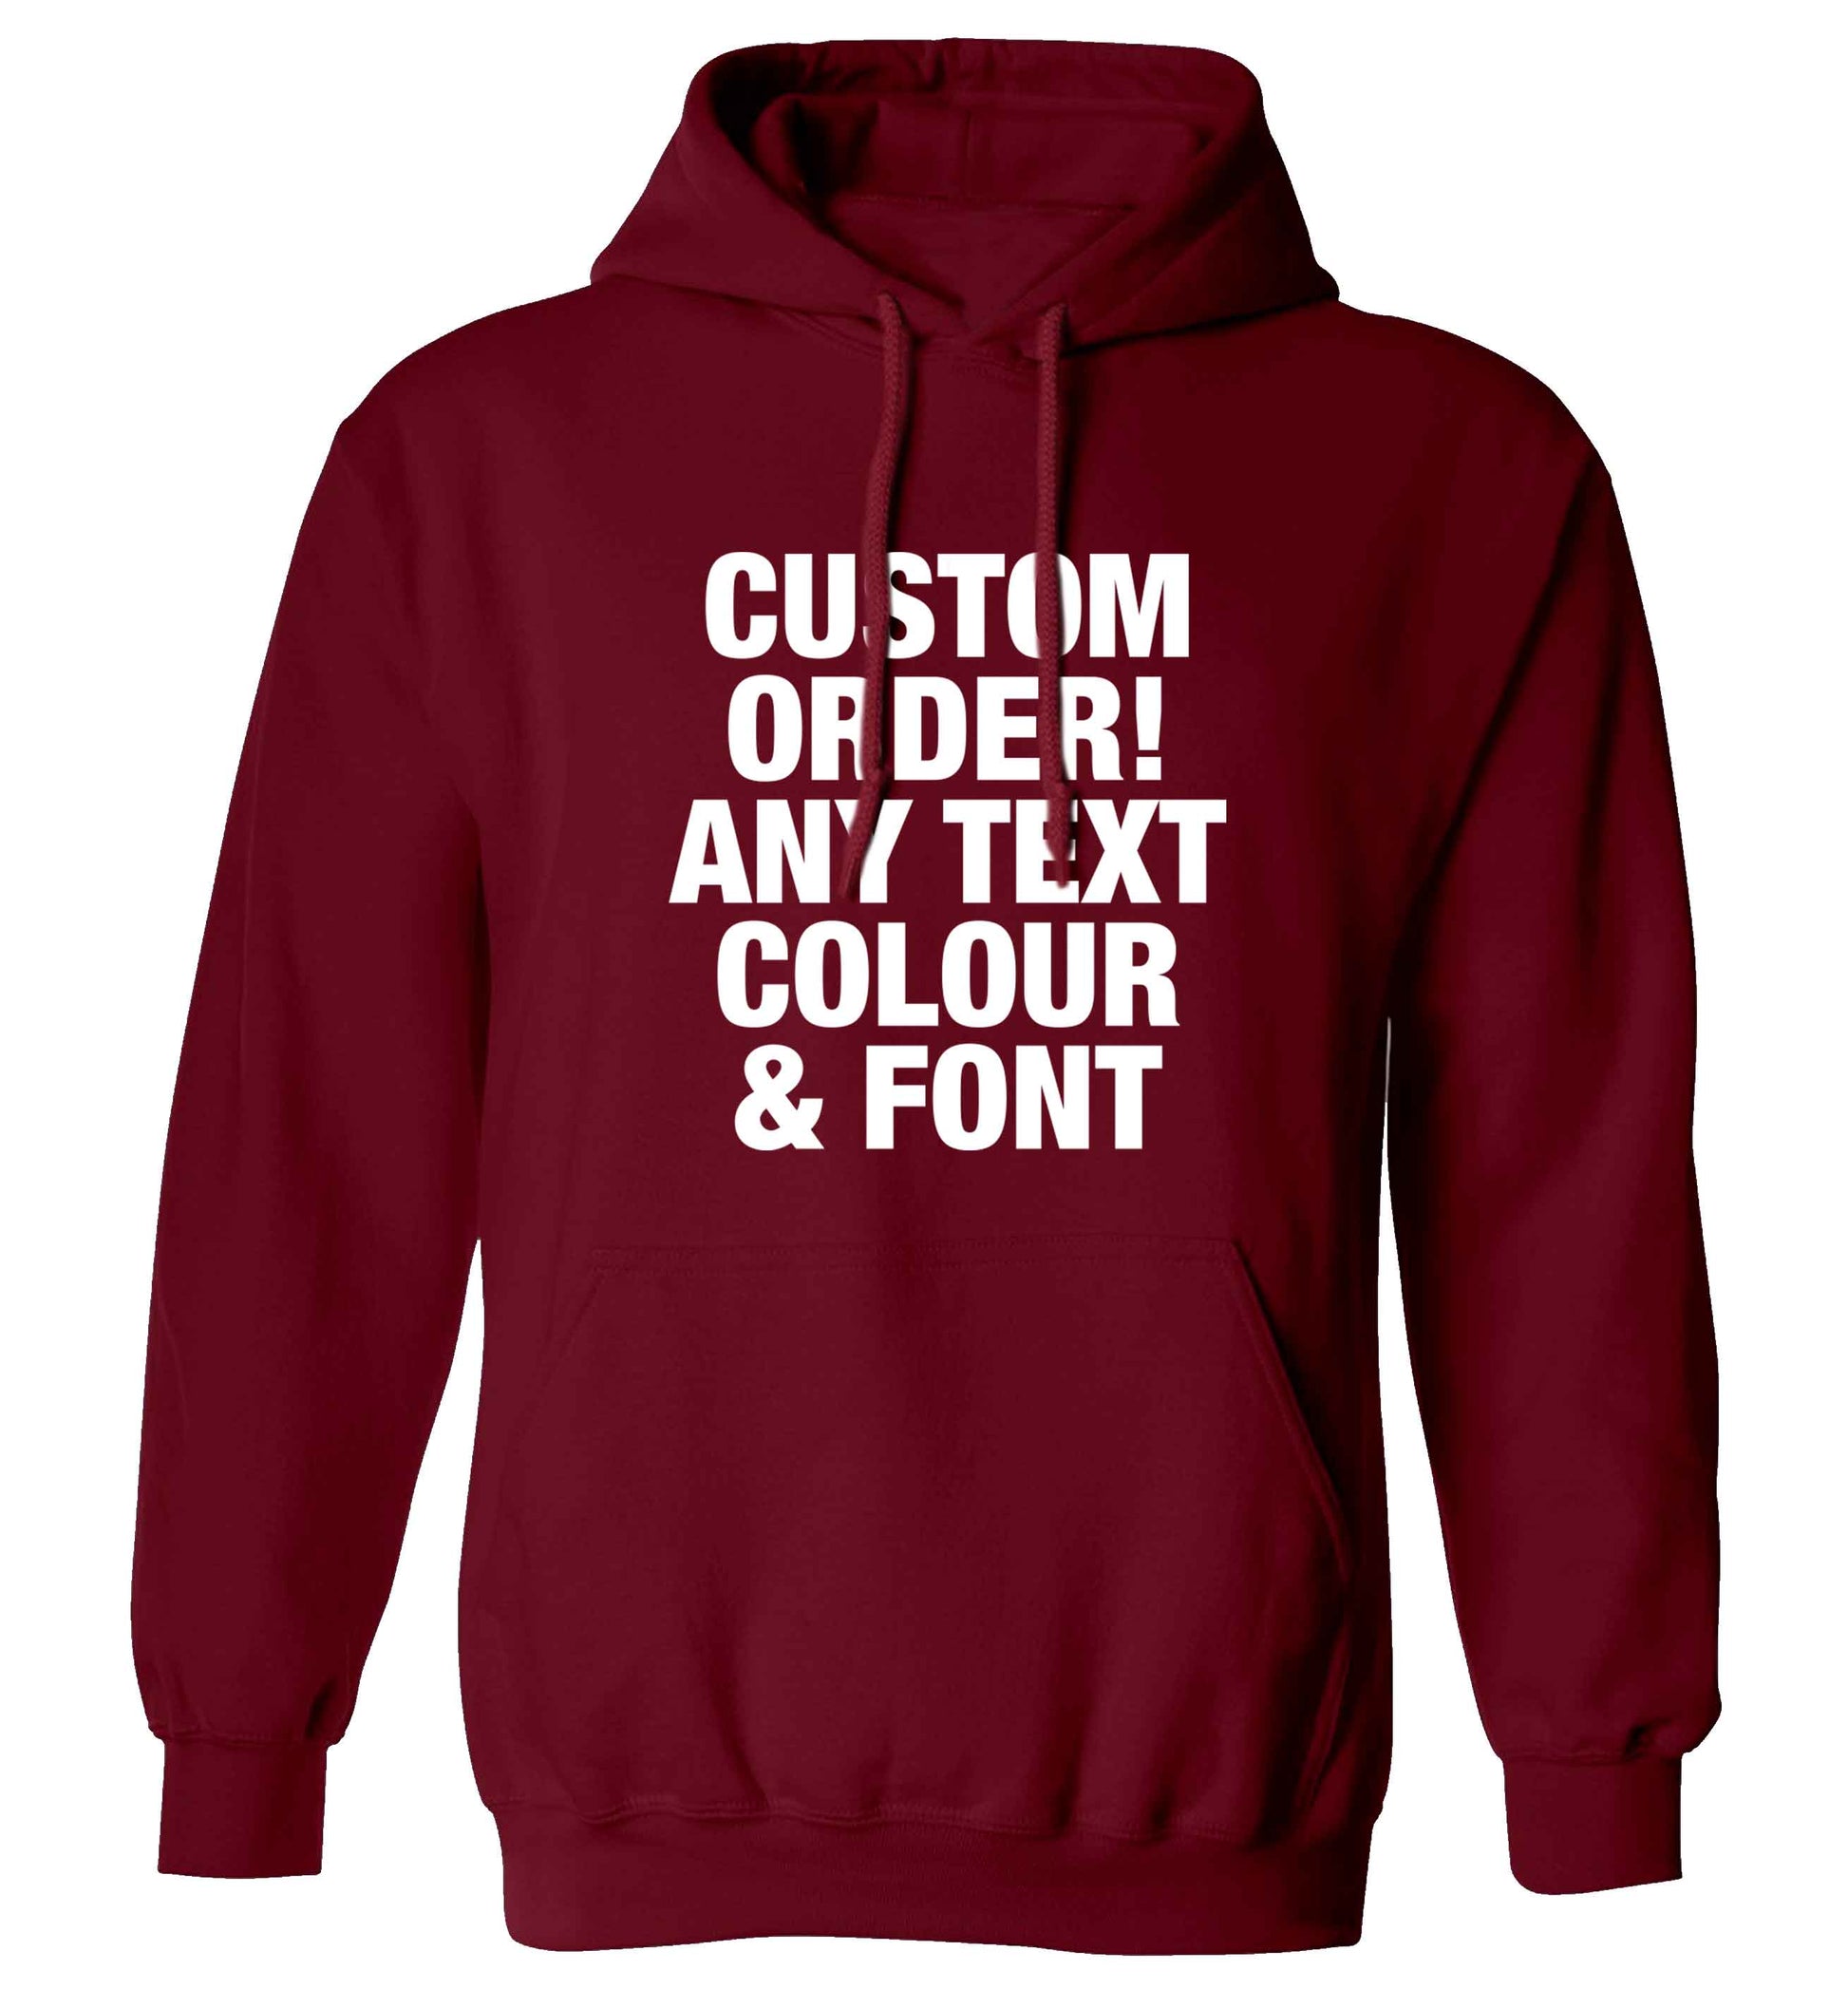 Custom order any text colour and font adults unisex maroon hoodie 2XL